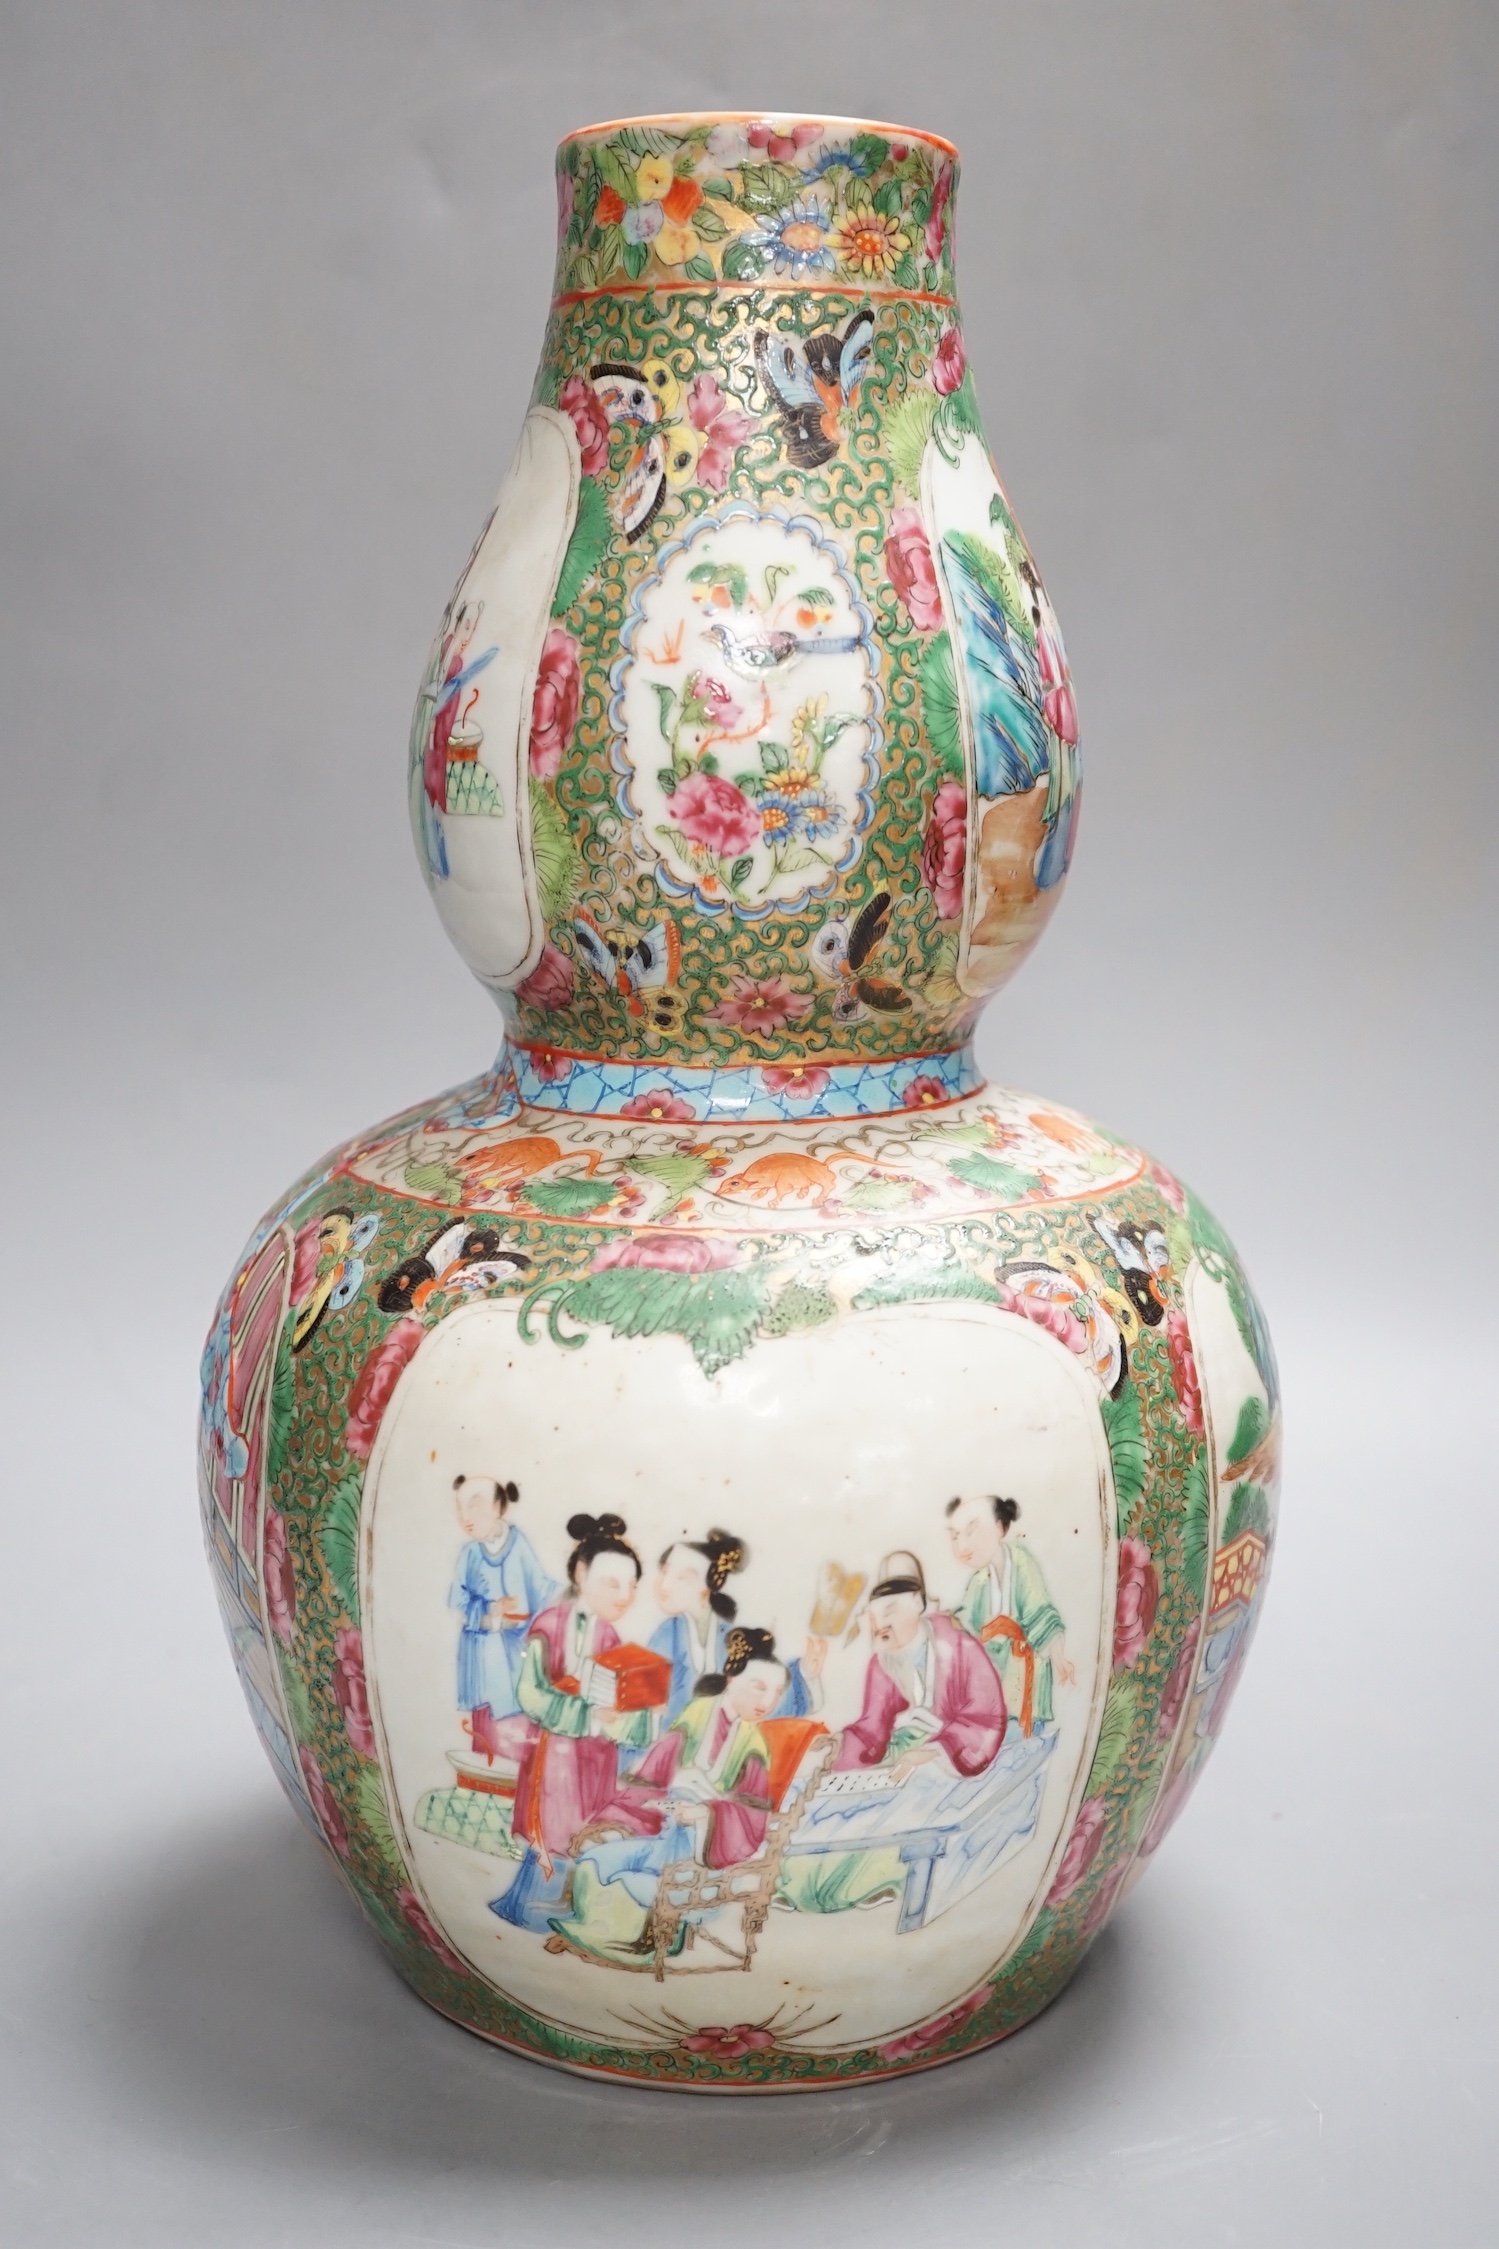 A 19th century Chinese famille rose double gourd vase - 31cm high